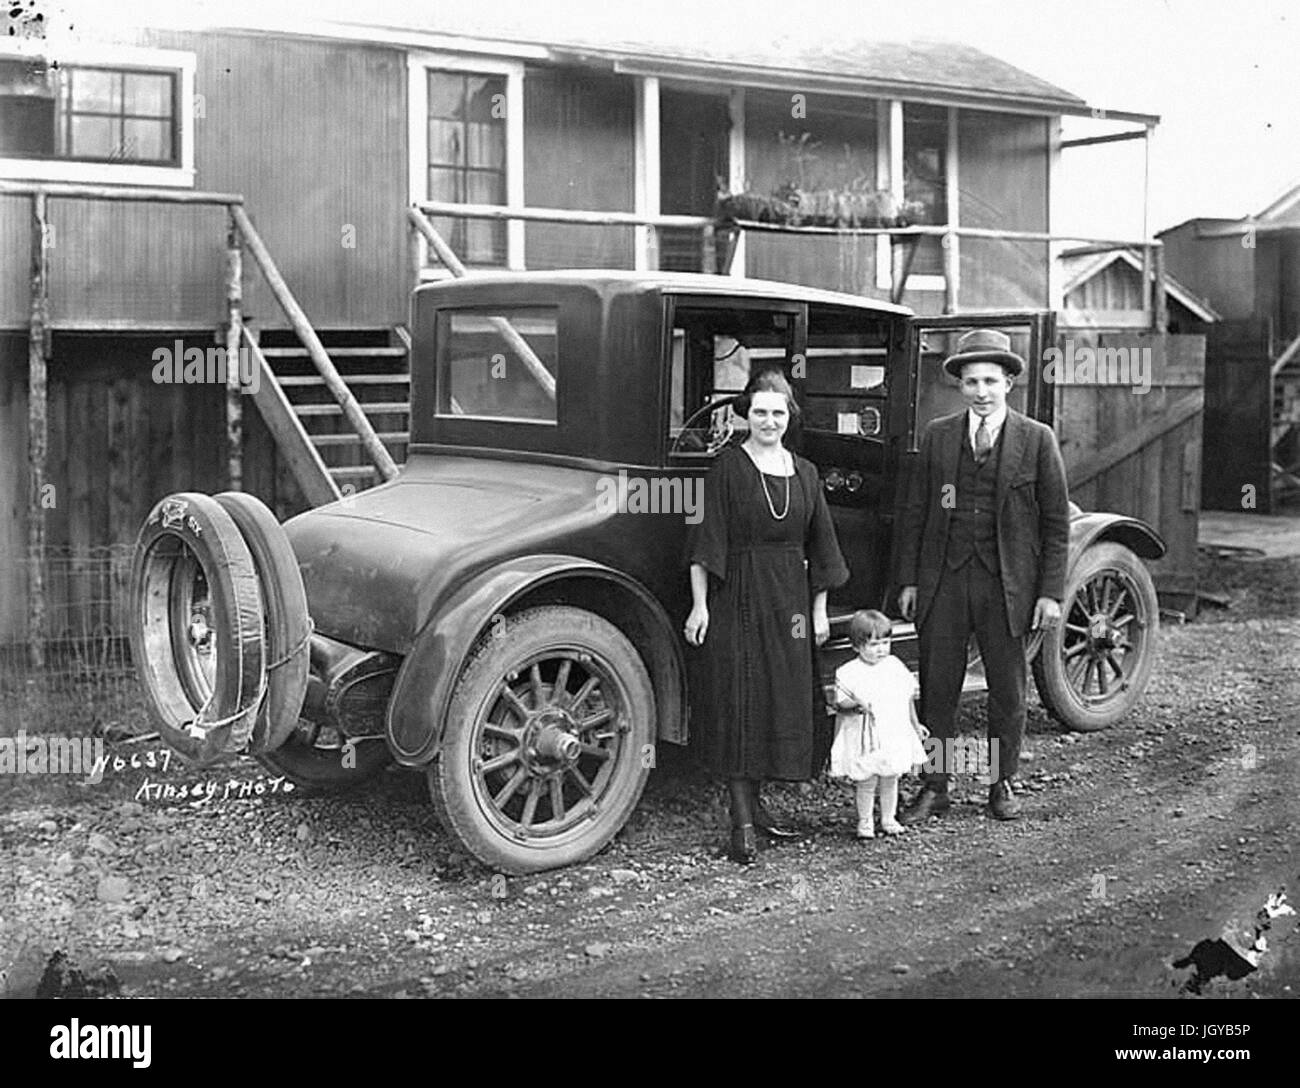 John Schafer with wife Neta Smith Schafer and daughter Bernice beside 1922 Buick Six automobile at railroad logging camp Stock Photo